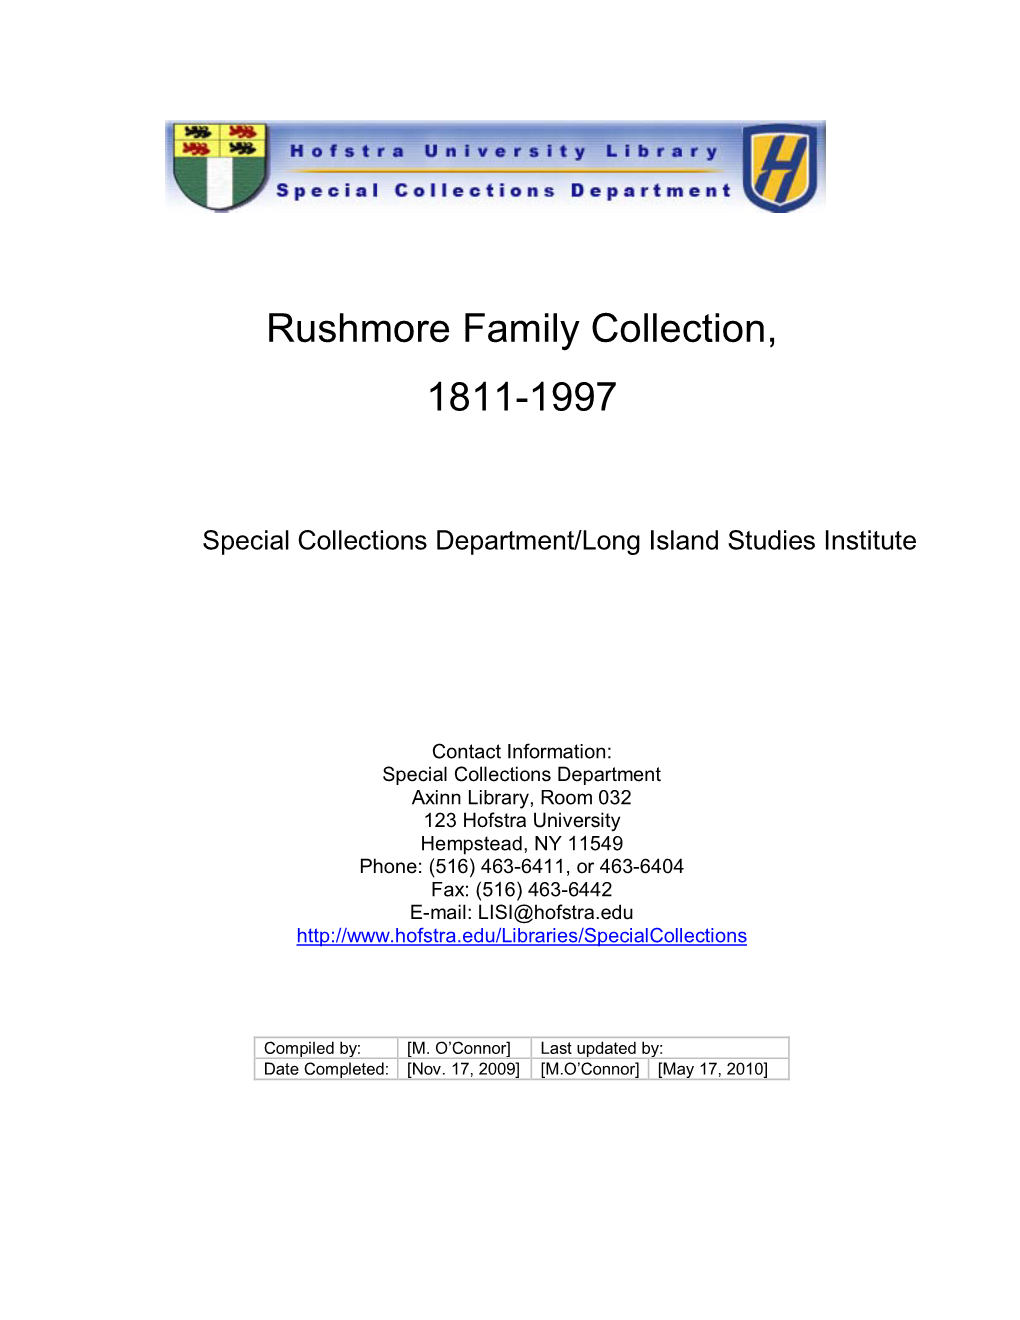 Rushmore Family Collection Finding